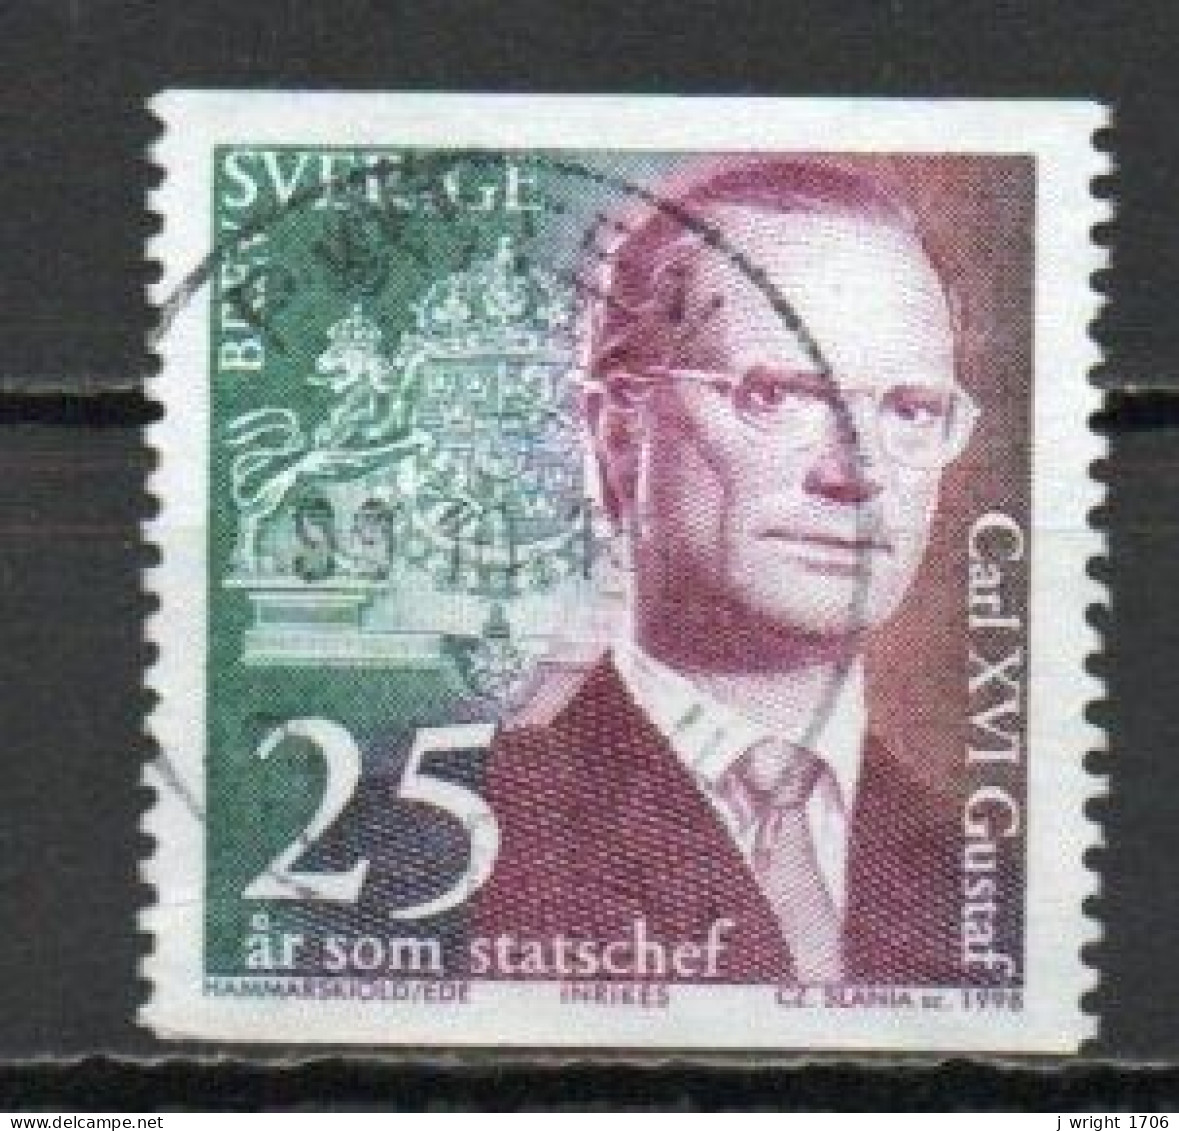 Sweden, 1998, King Carl XVI Gustaf Accession 25th Anniv, Letter, USED - Used Stamps